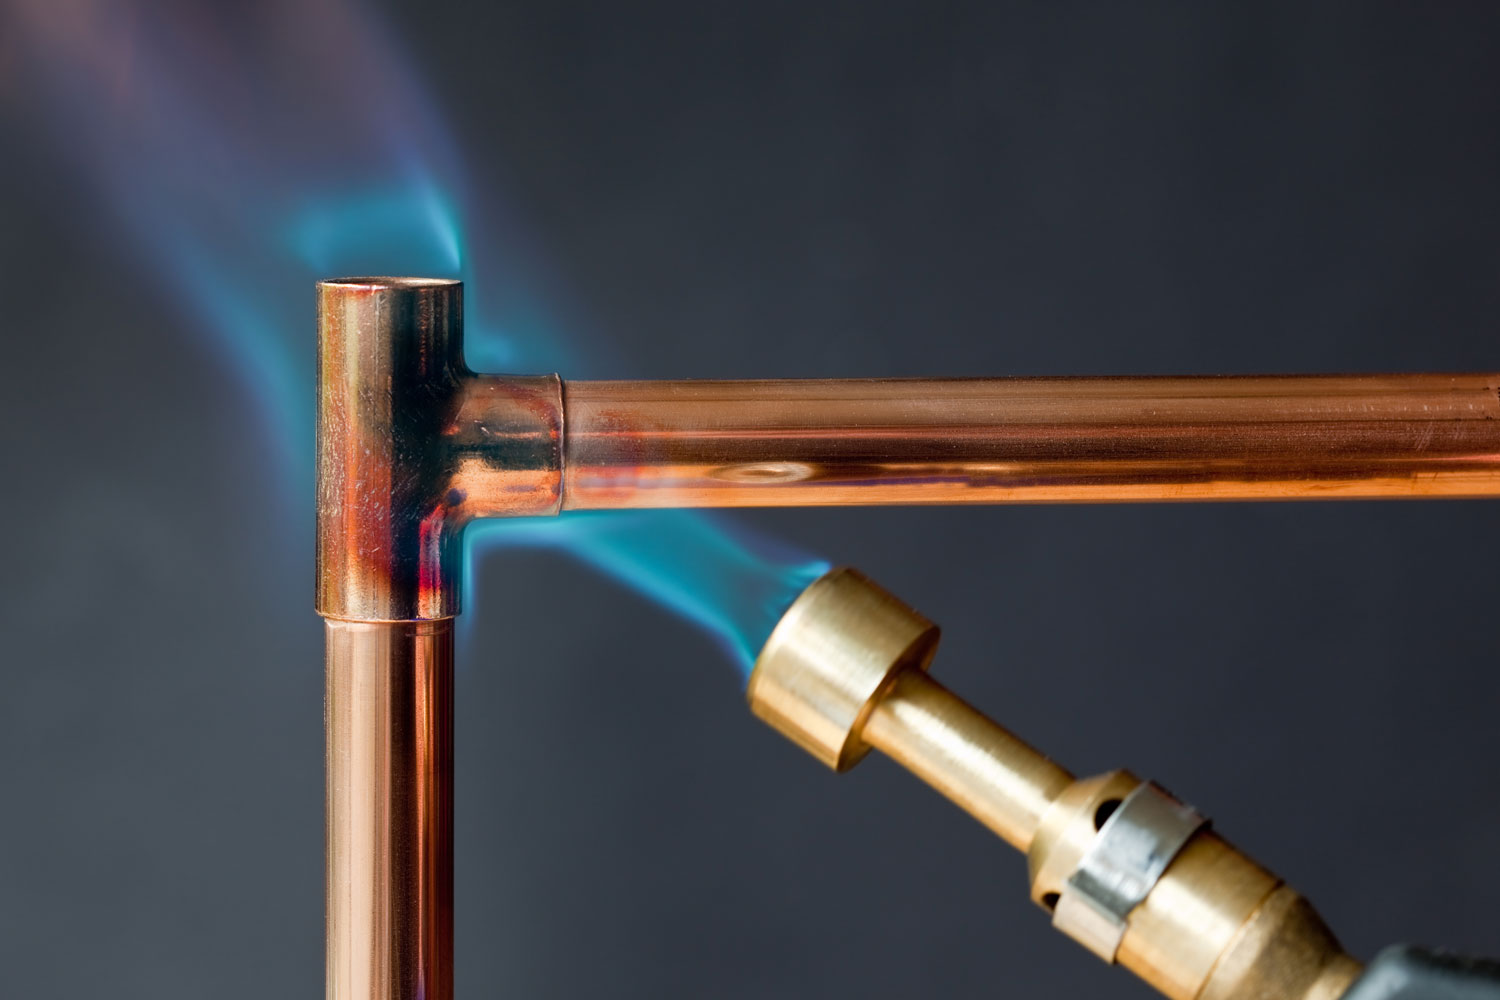 Heating and assembling copper pipes